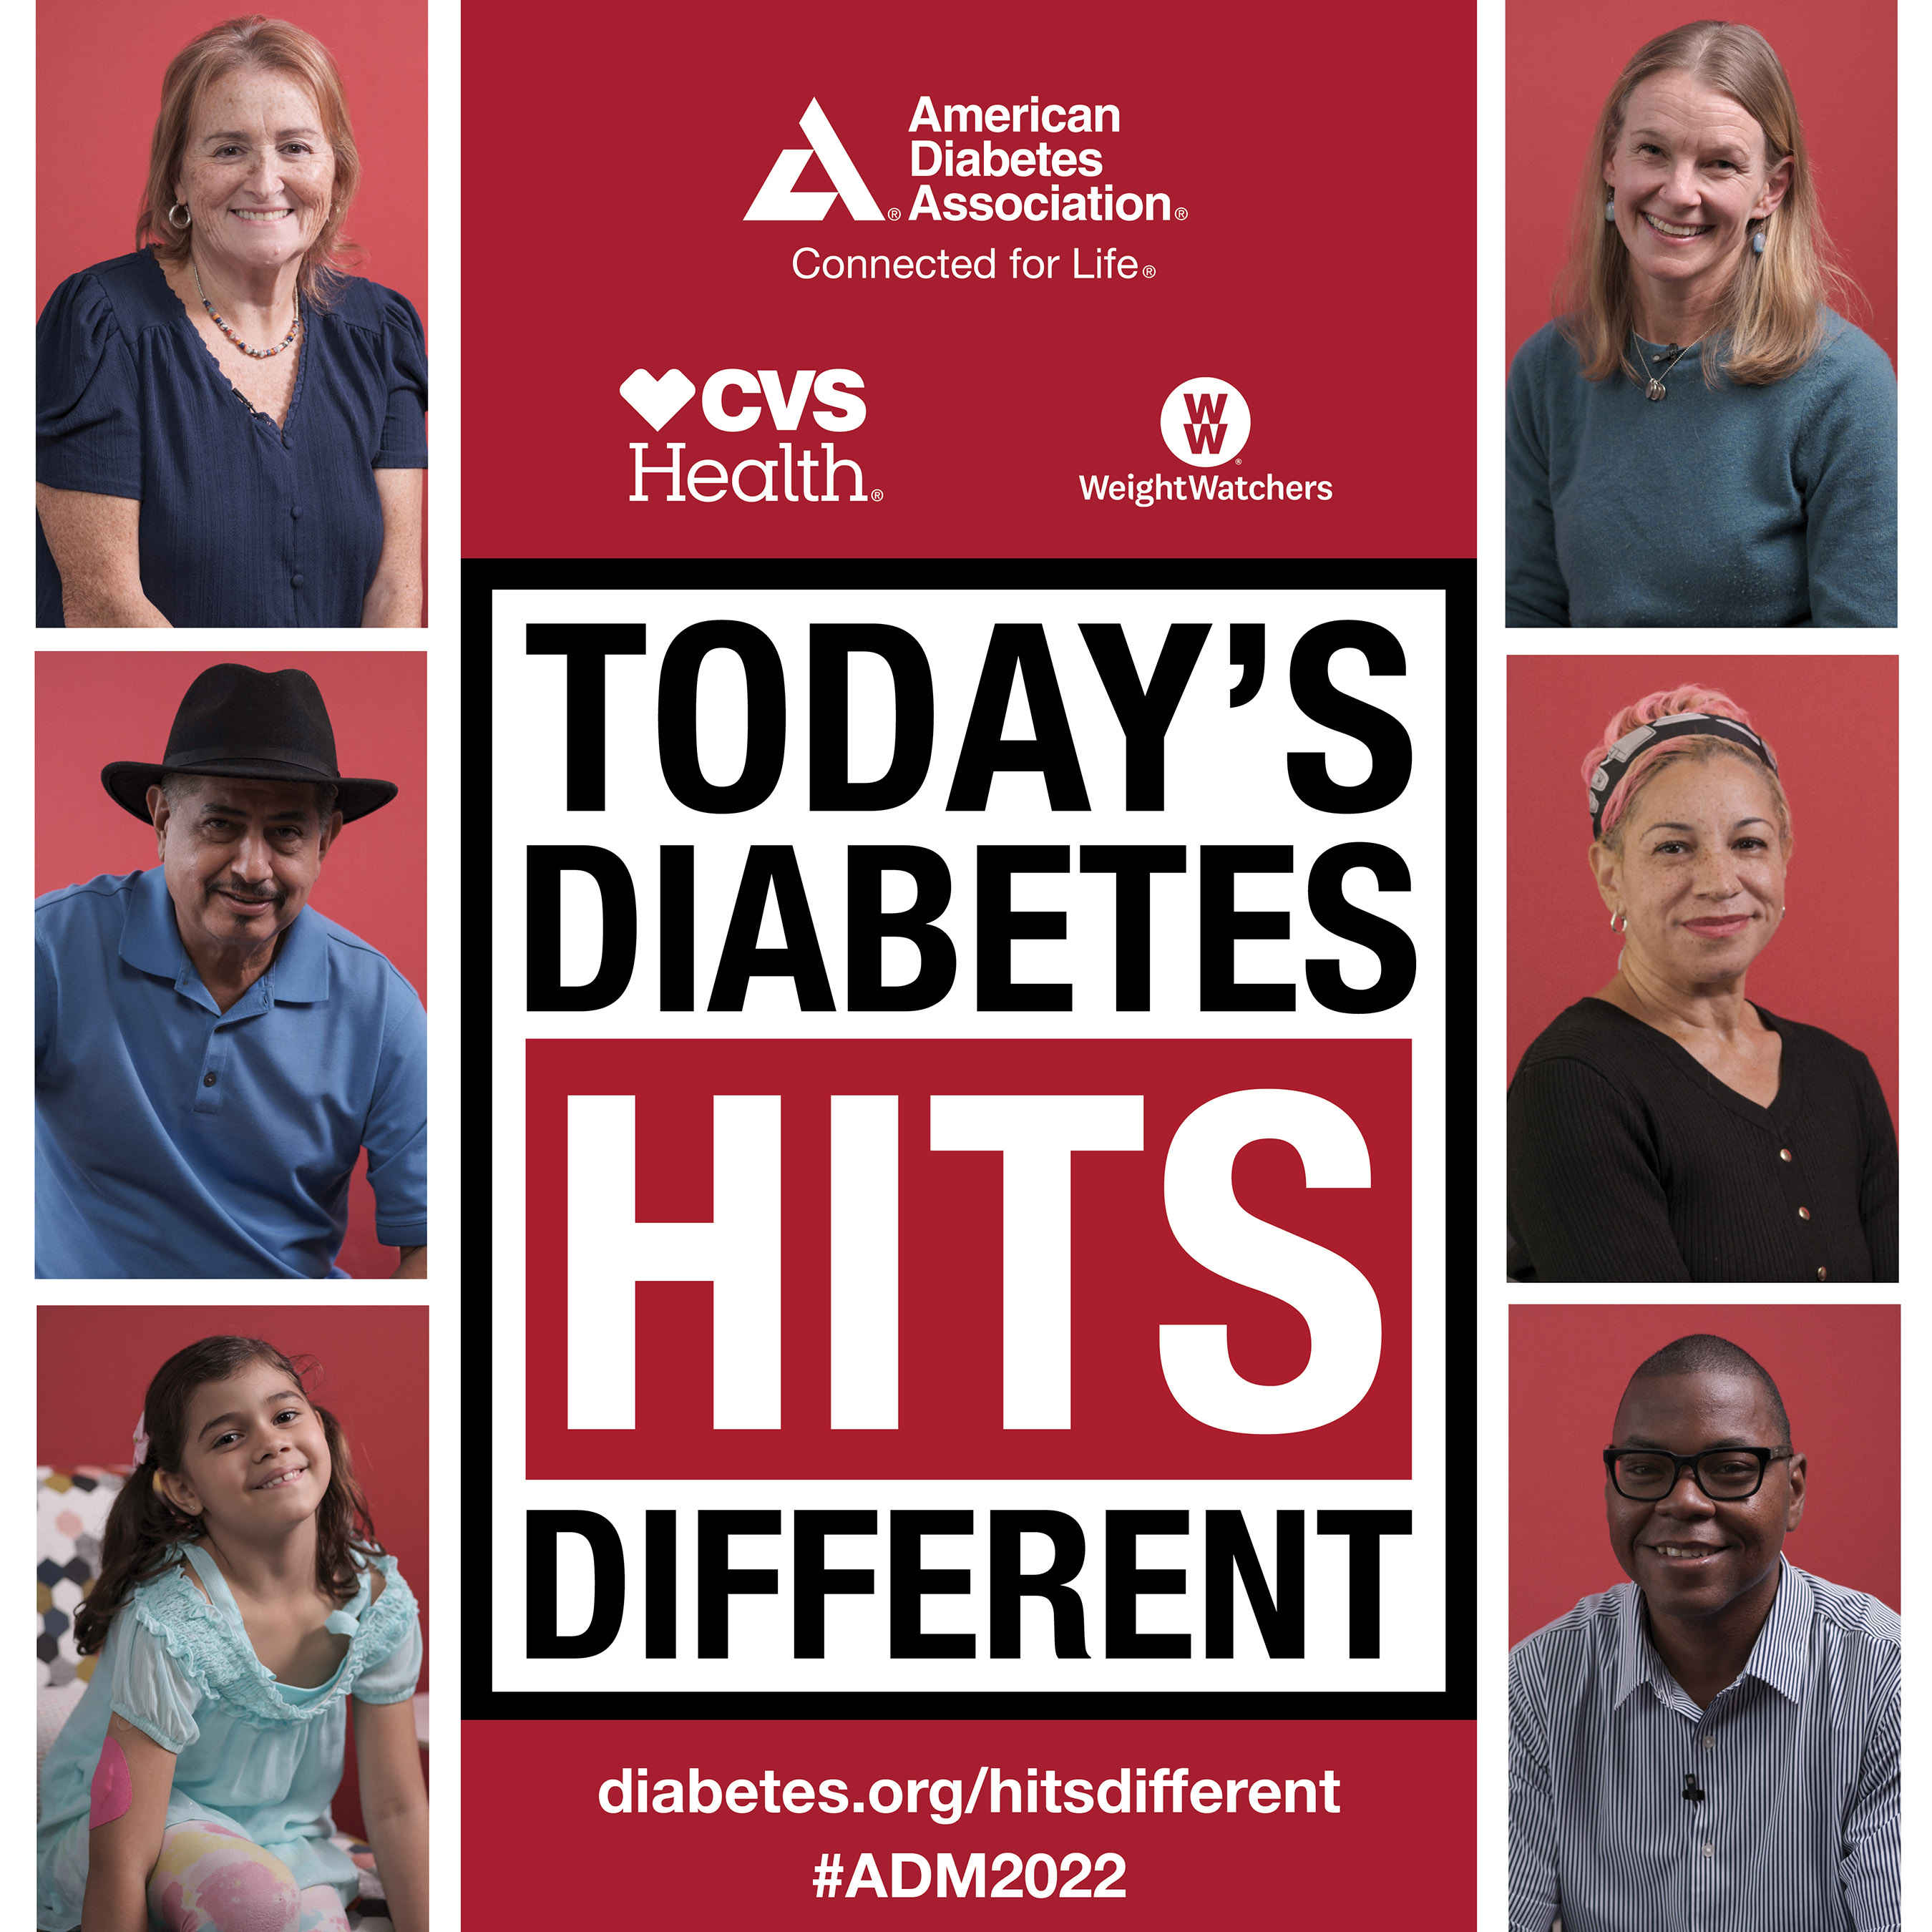 Today’s Diabetes Hits Different This American Diabetes Month For Over 133M Americans Living with Prediabetes and Diabetes